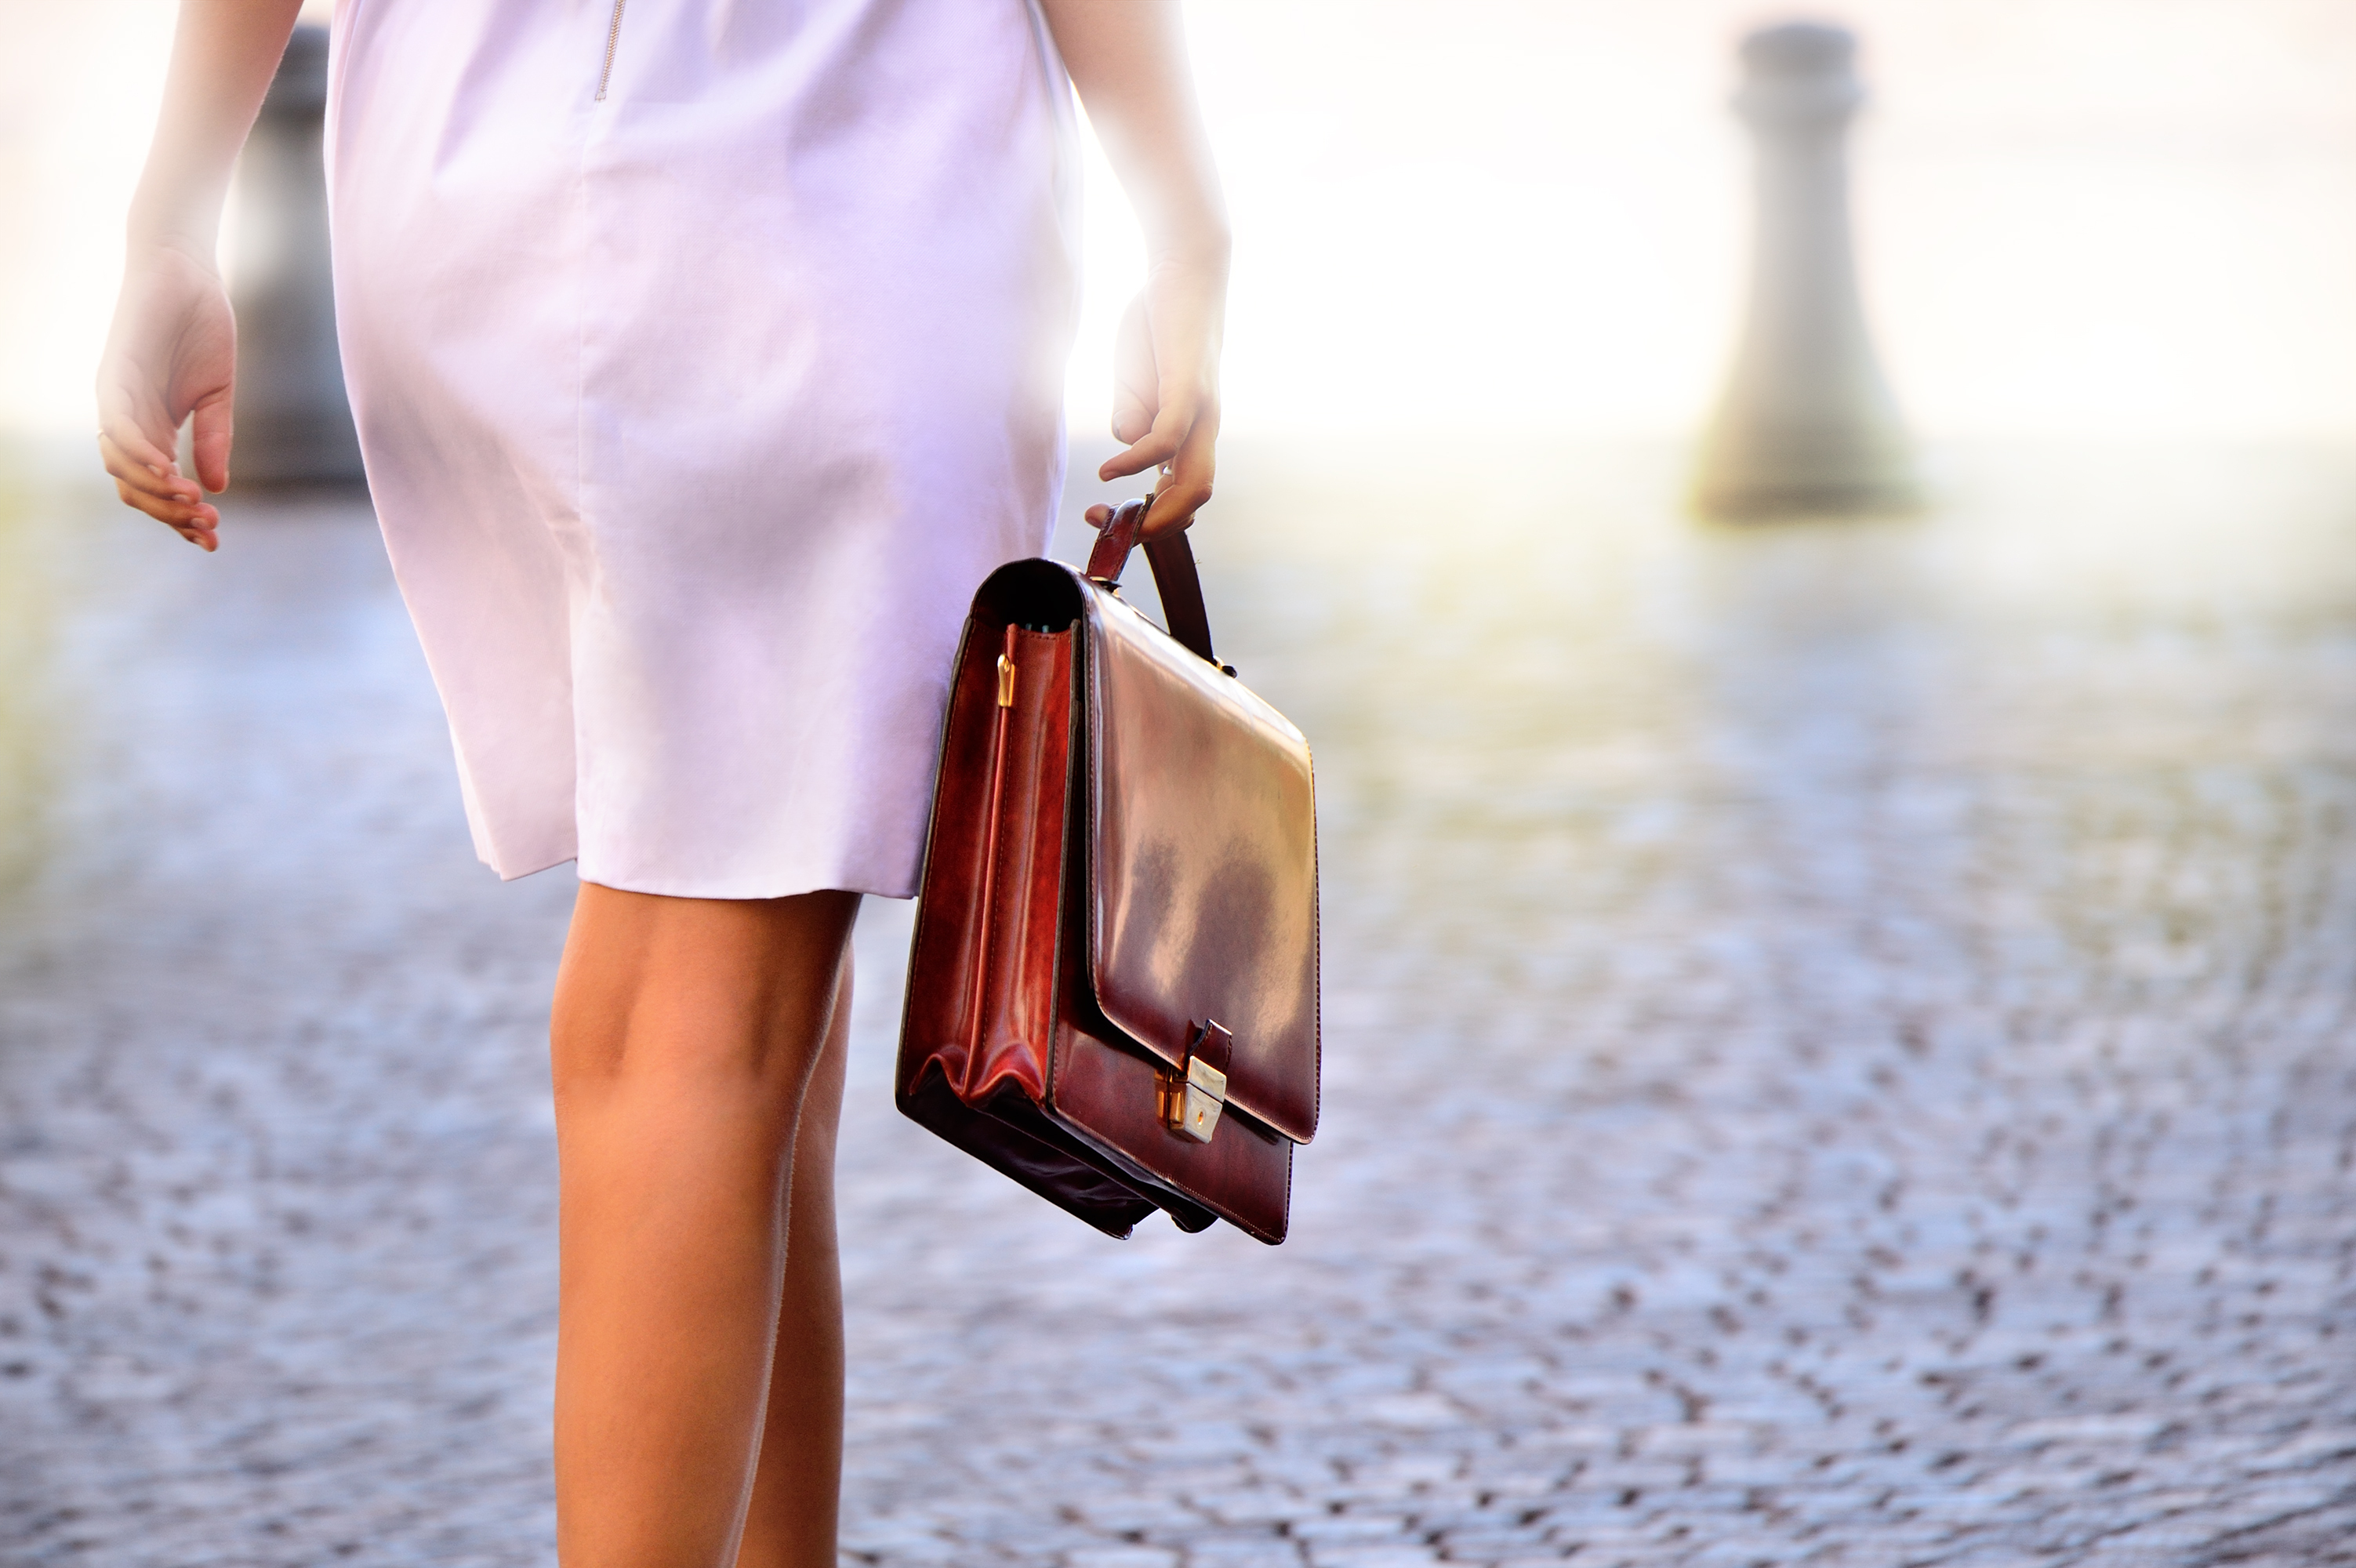 Woman in skirt walking with briefcase